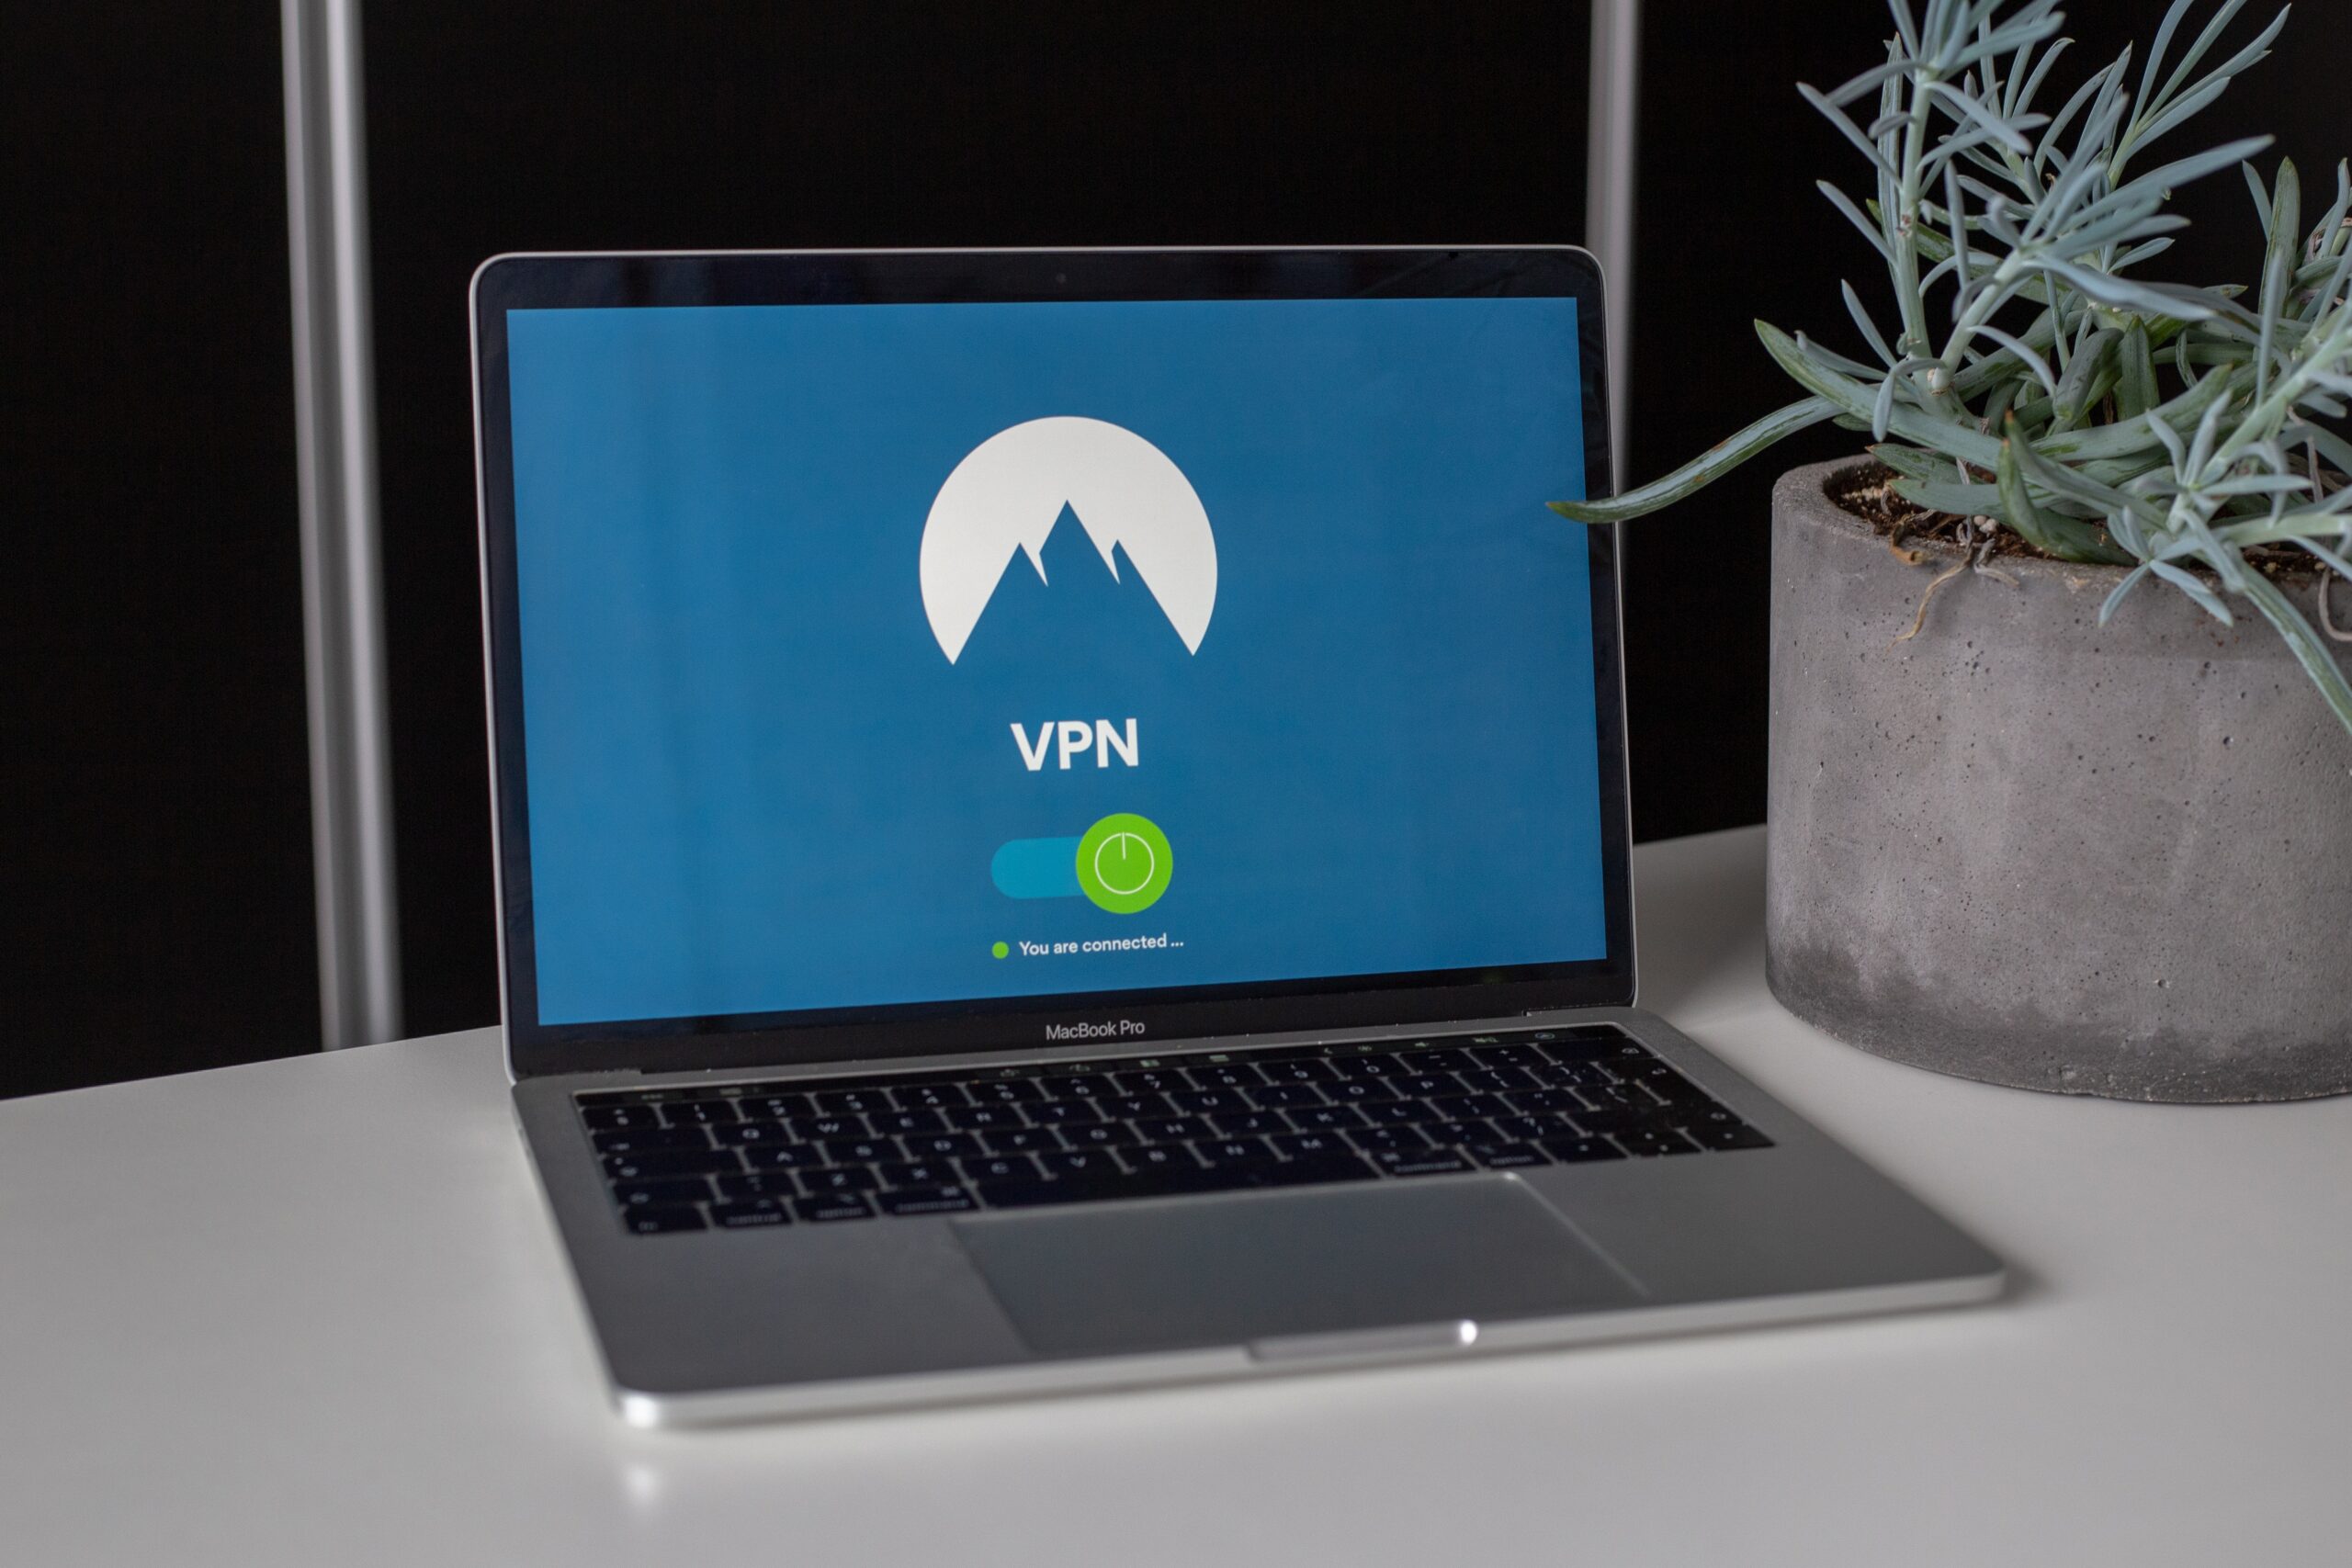 why you should use a vpn: Info for non-tech savvy people.
